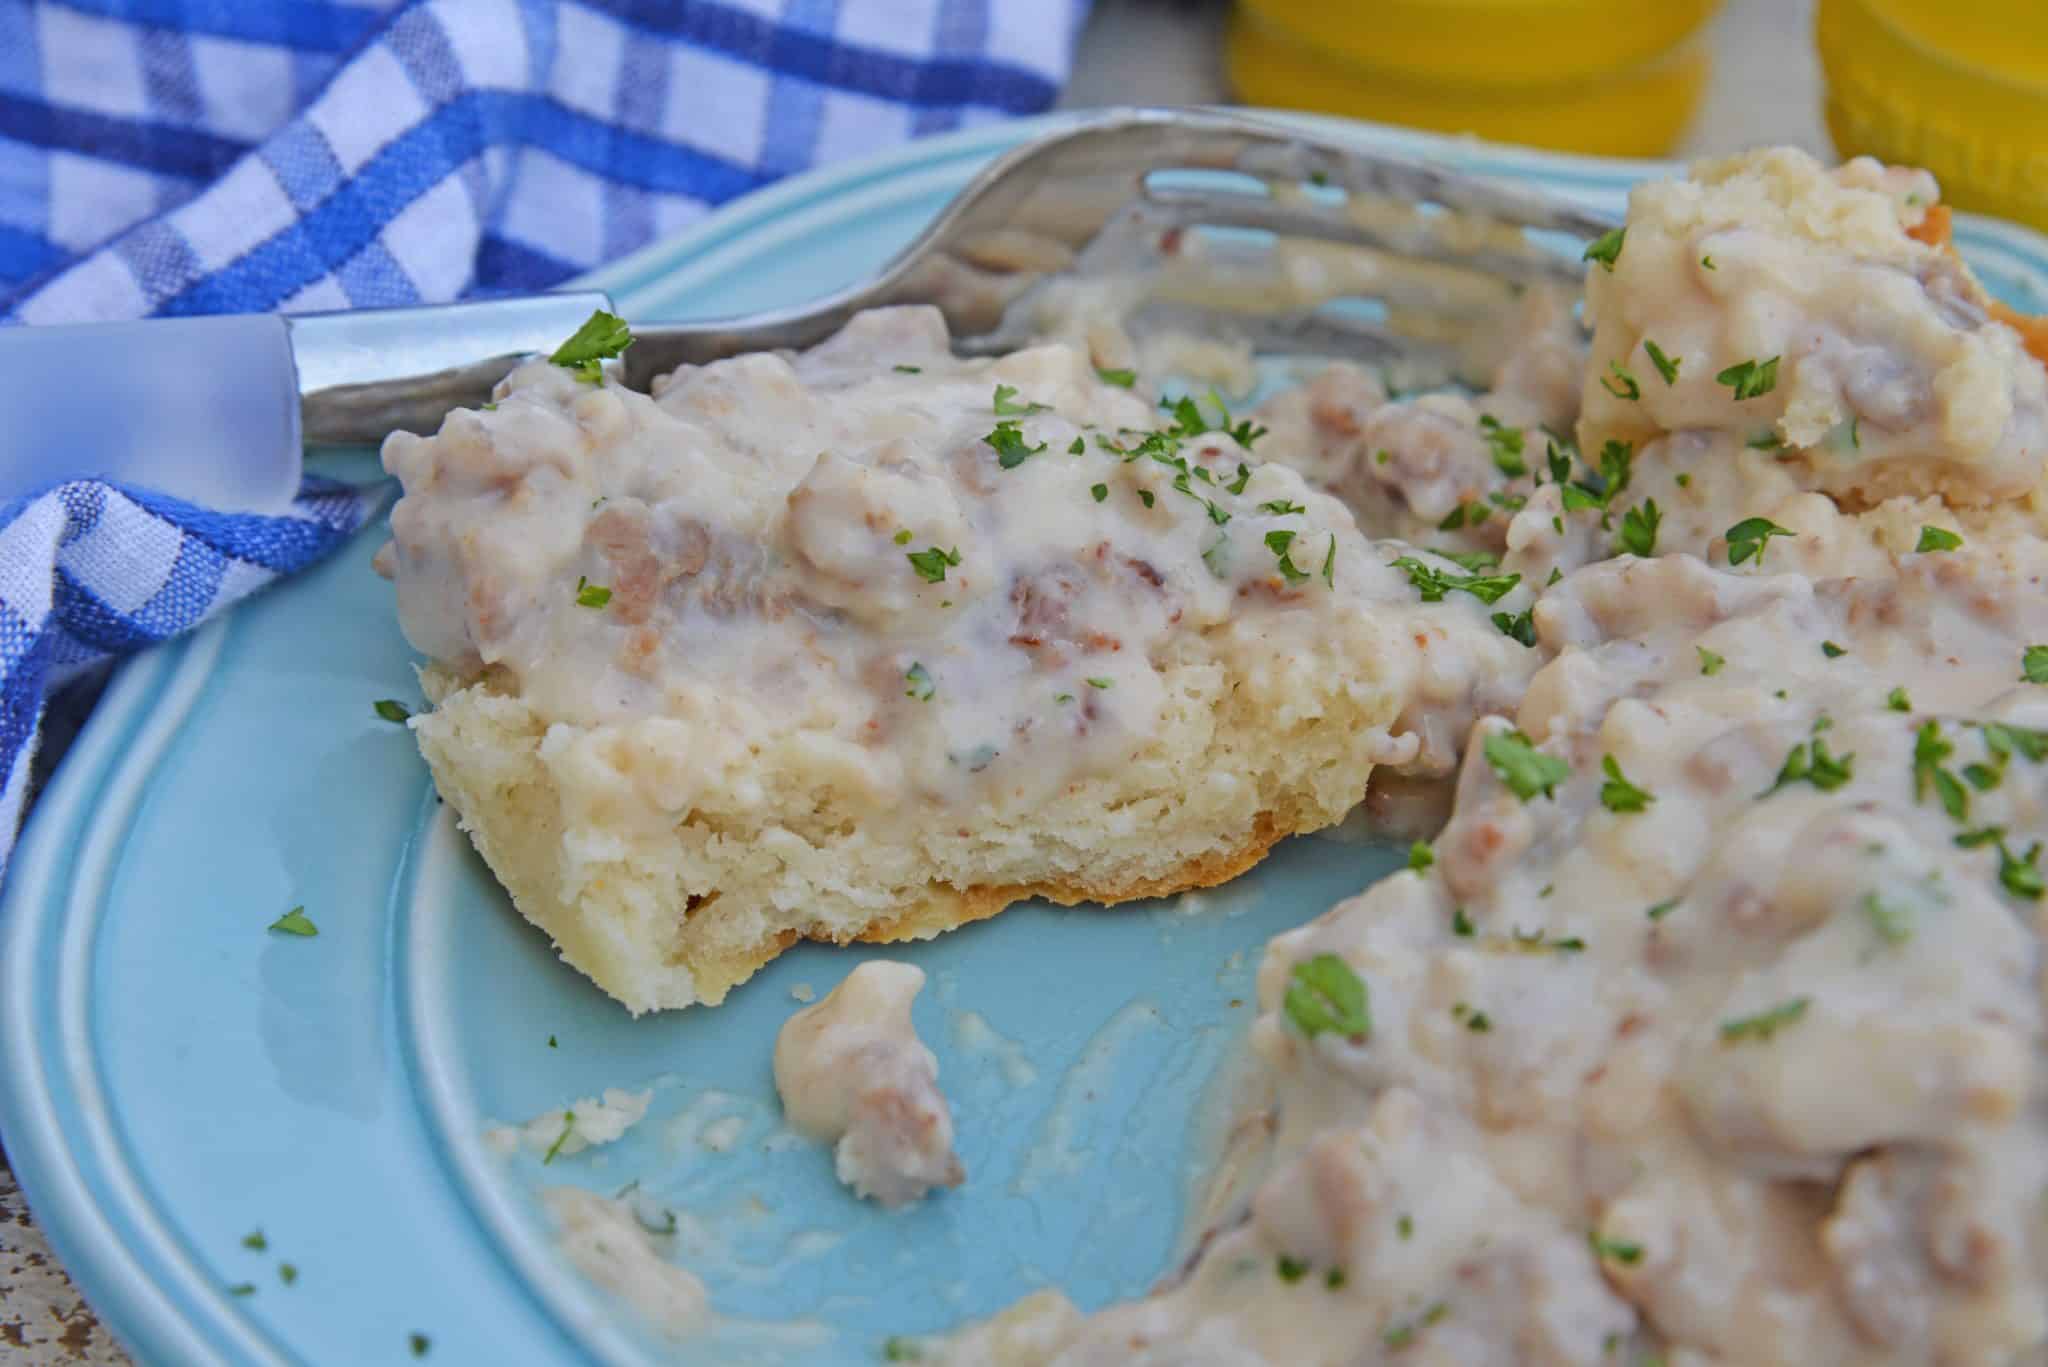 Creamy Sausage Gravy, a simple recipe made from pork sausage and cream and a few other ingredients, is a Southern staple. Serve over warm biscuits,  fried chicken or chicken fried bacon. #sausagegravy #breakfastgravy www.savoryexperiments.com 